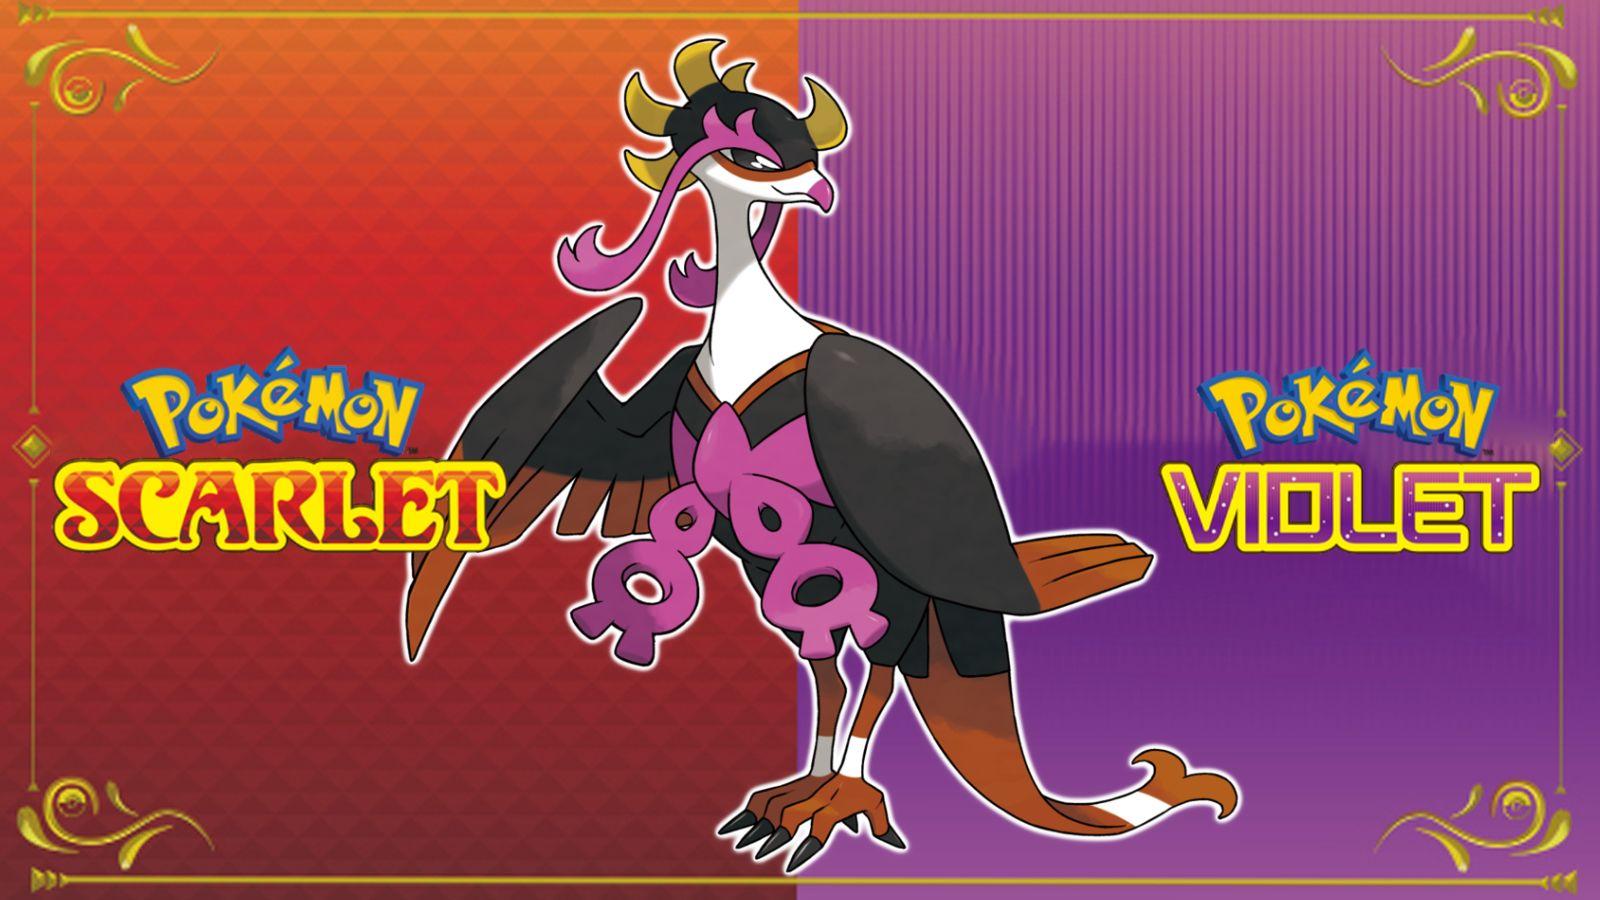 All New Shiny Forms in Pokemon Scarlet and Violet The Teal Mask